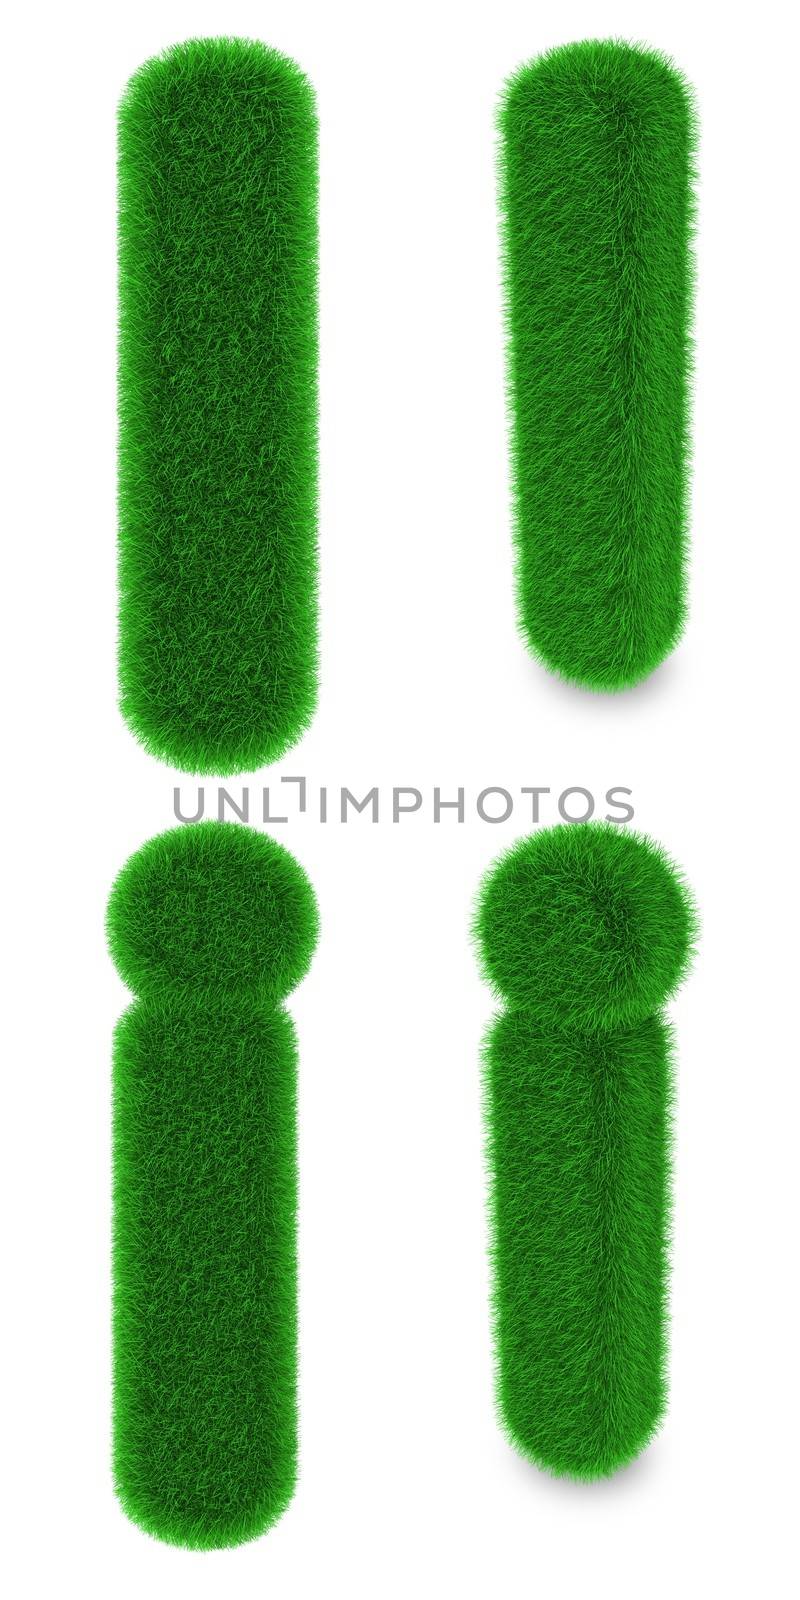 Letter I covered by green grass isolated on white background